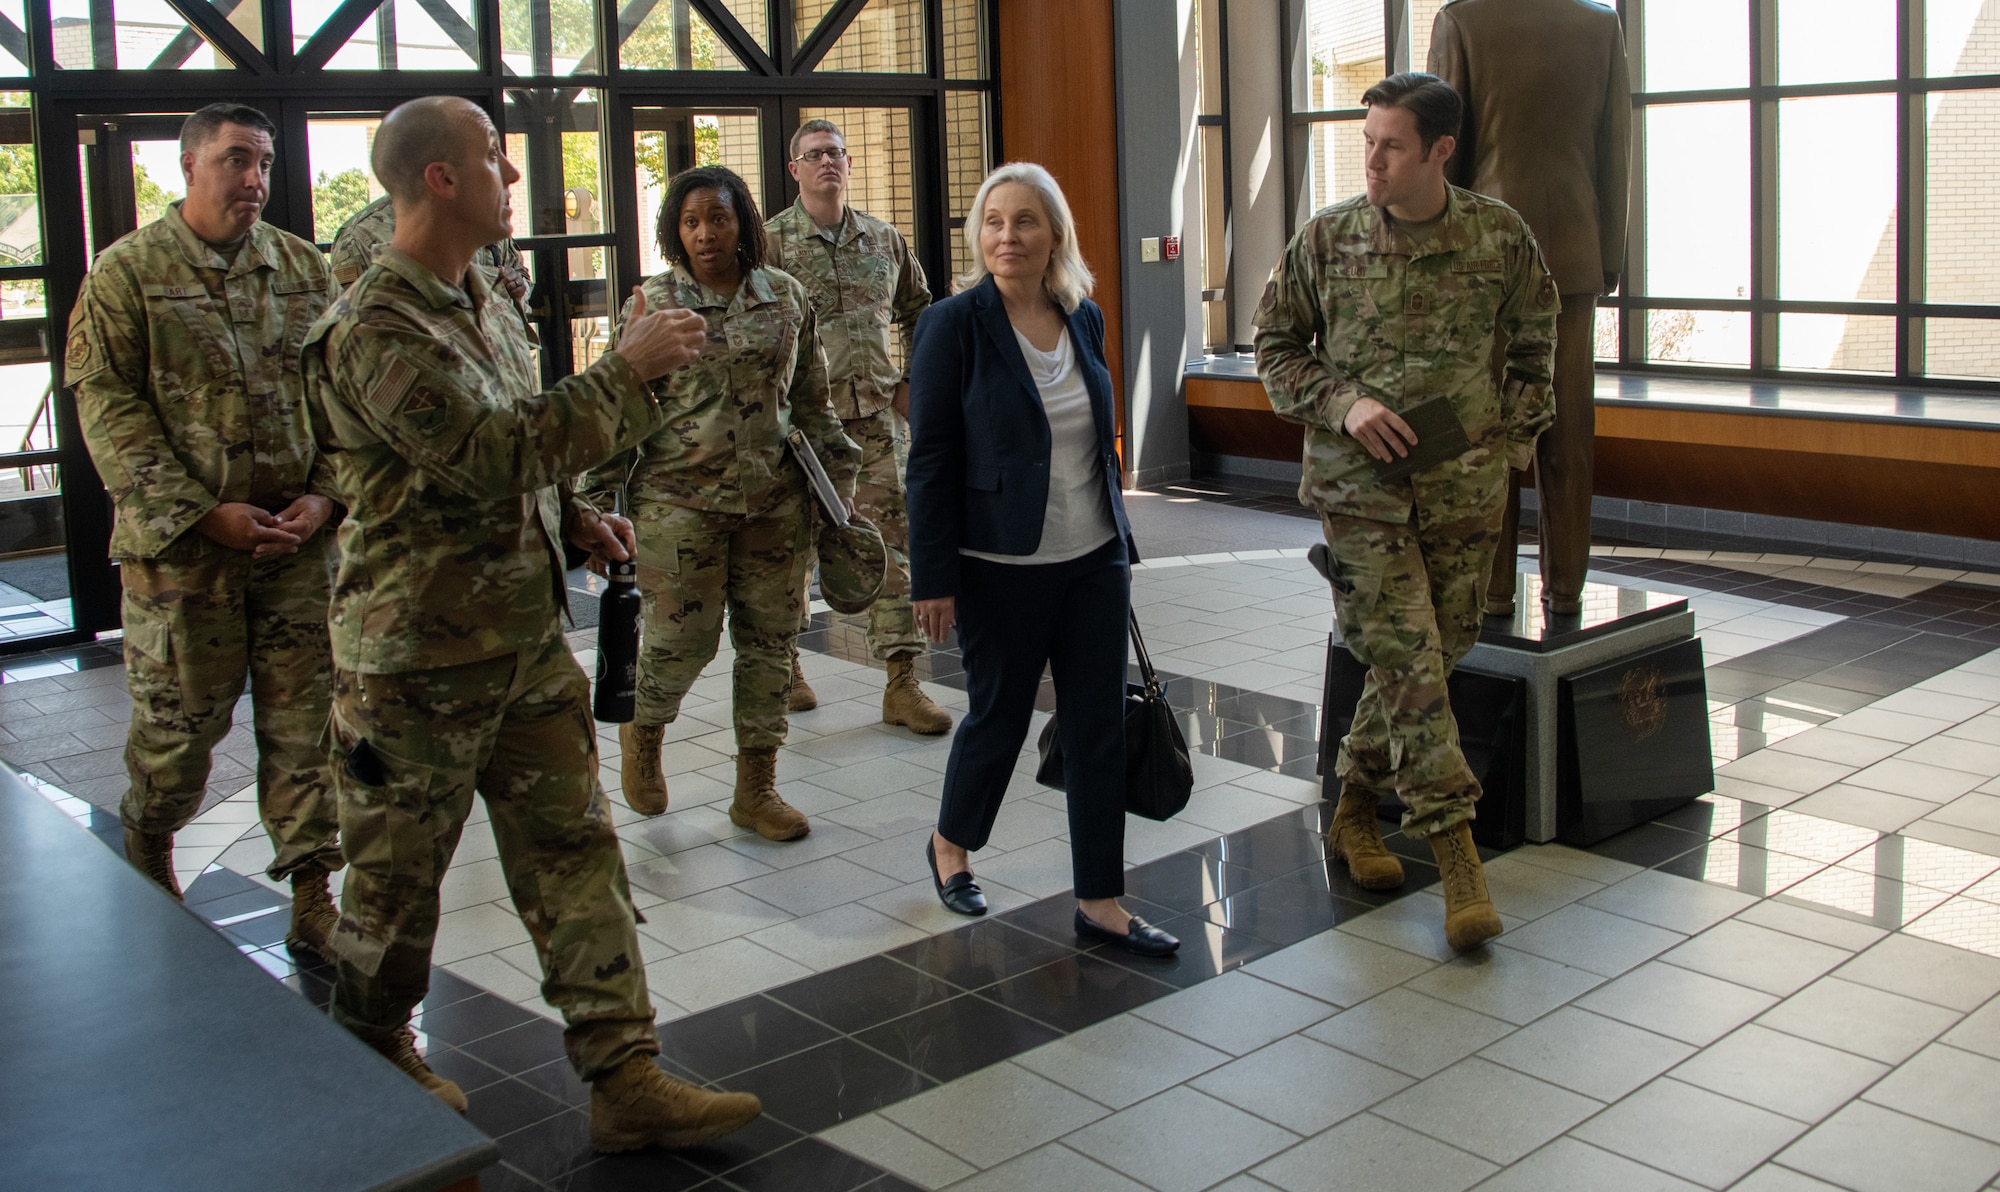 Crystal Moore, director of Force Development, Headquarters Air Force, is greeted by Senior Noncommissioned Officer Academy staff upon her arrival at Kisling Hall on Maxwell Air Force Base, Gunter Annex, Ala., Sept. 7, 2023. Moore took over as HAF Force Development director in June 2023, and was on Gunter Annex for an enlisted professional military education immersion. (U.S. Air Force photo/Brian Ferguson)